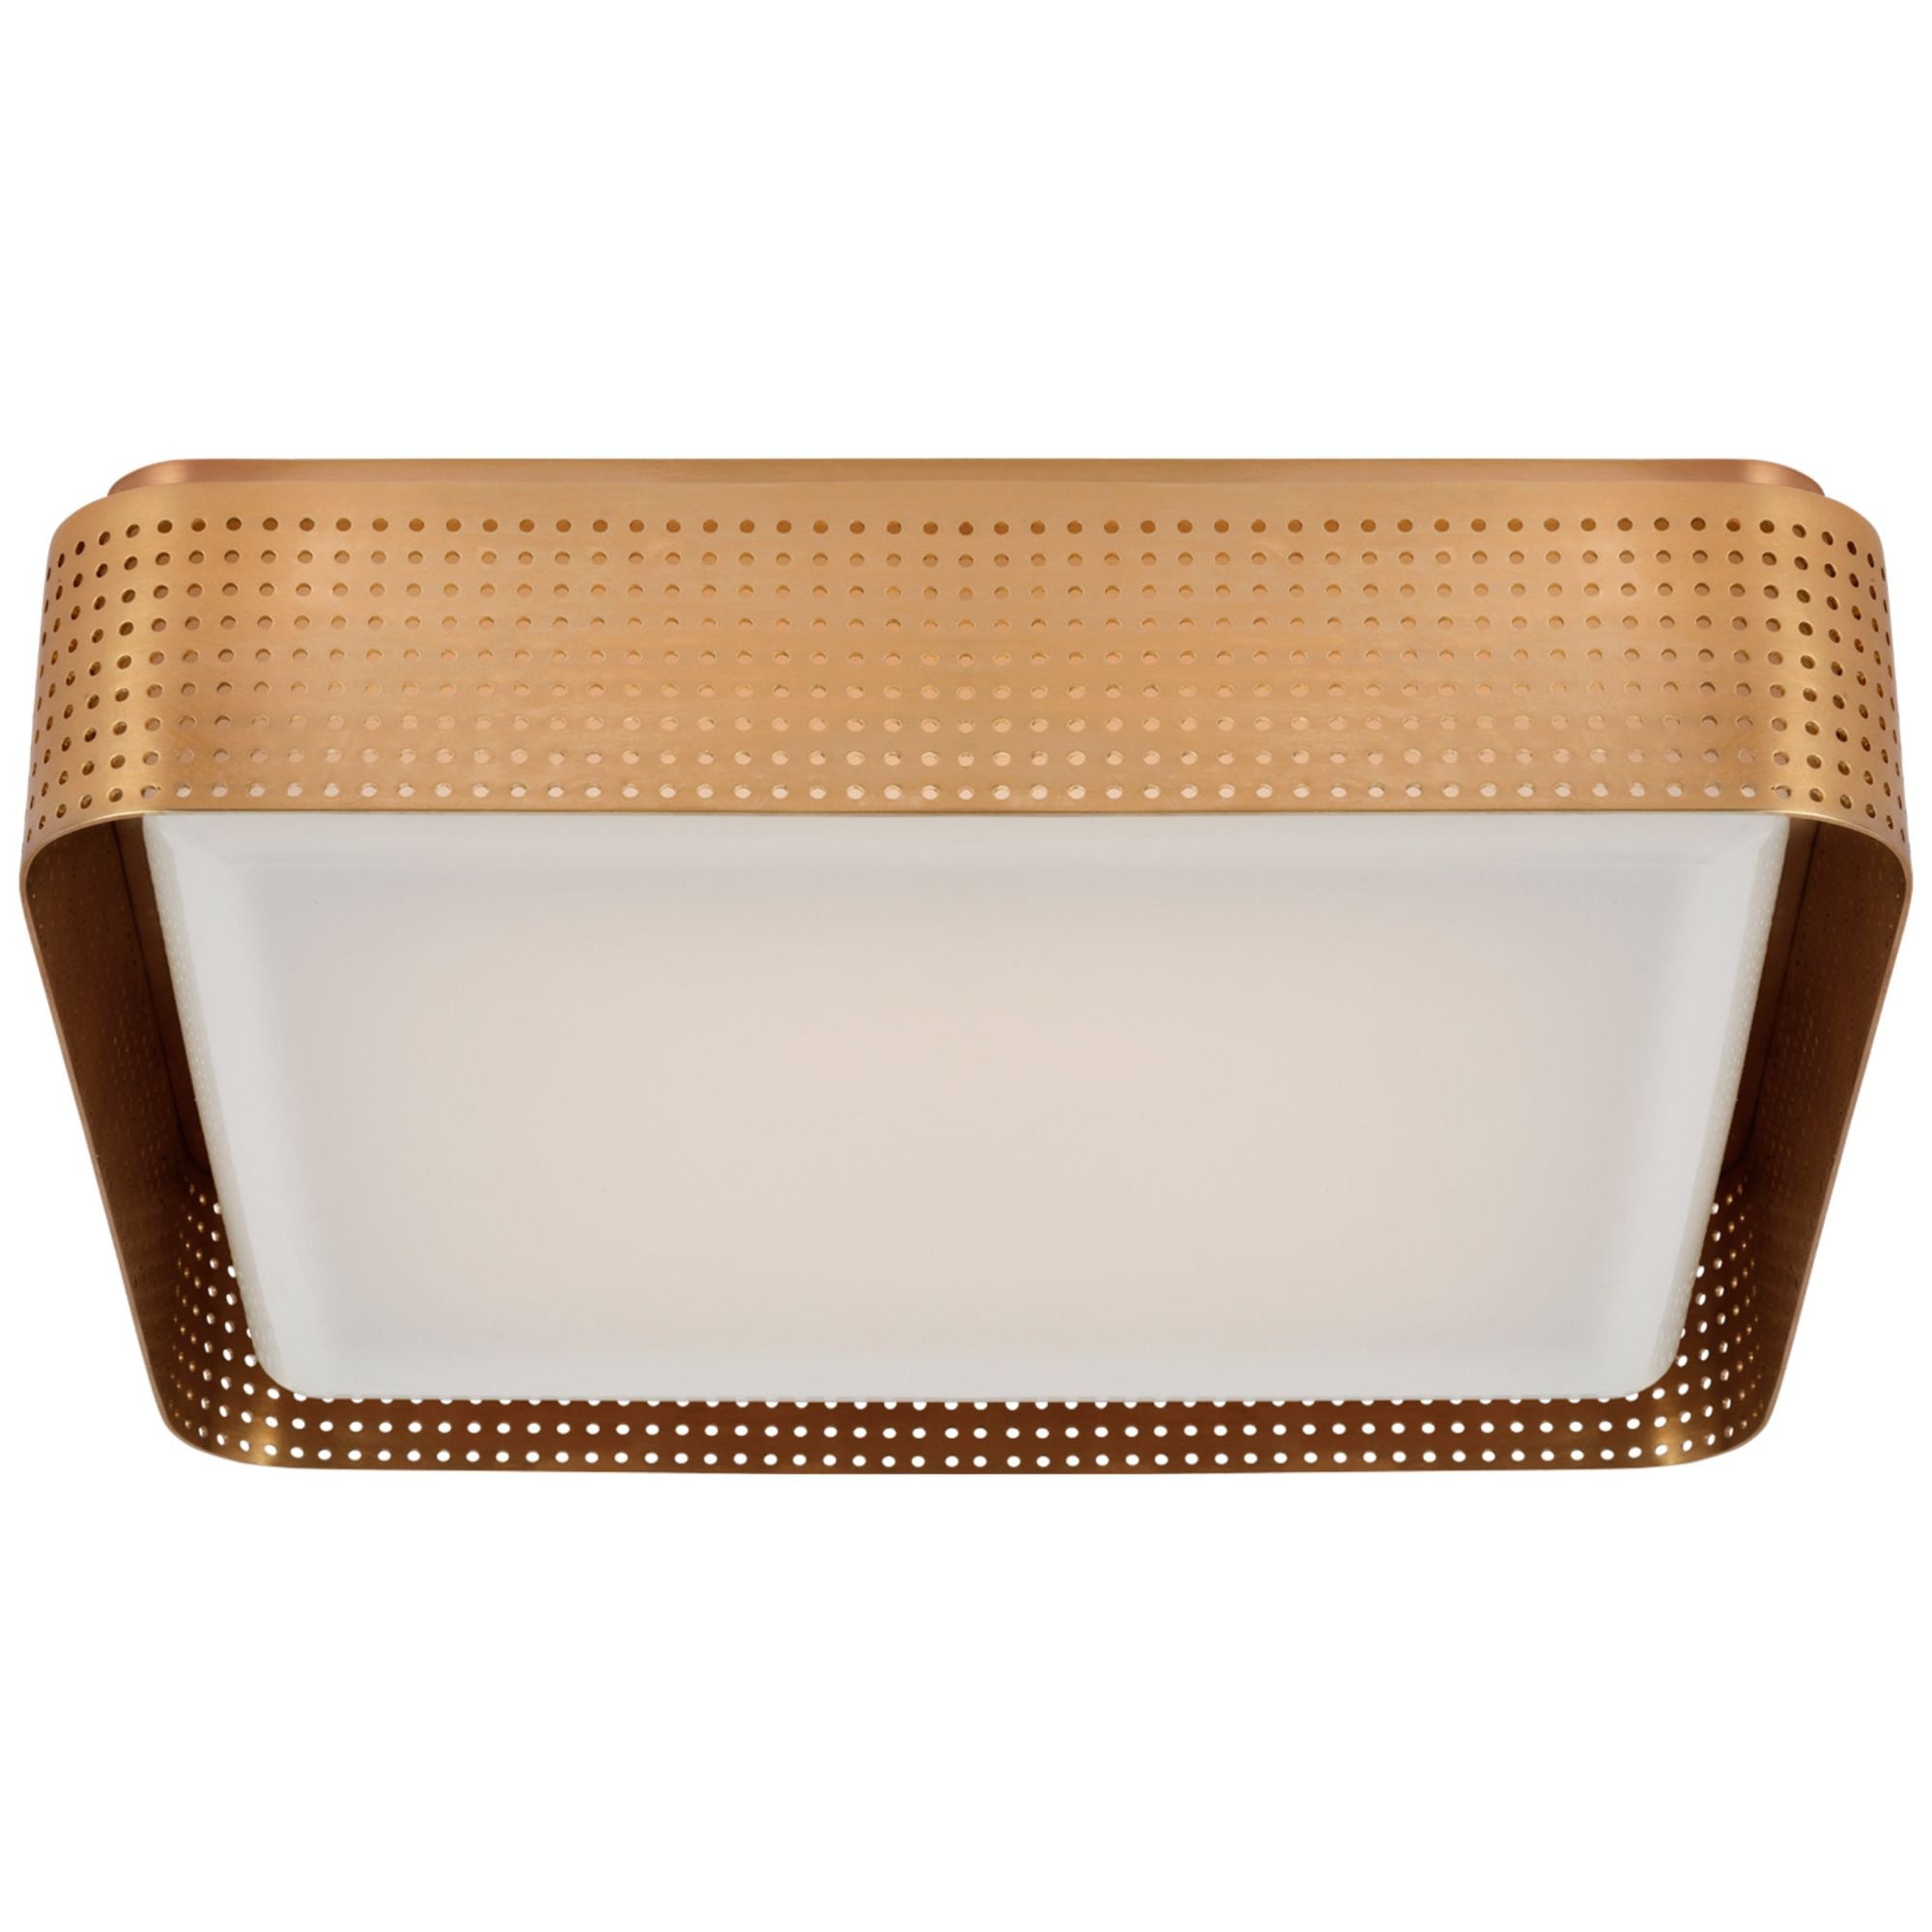 Kelly Wearstler Precision 16" Square Flush Mount in Antique-Burnished Brass with White Glass